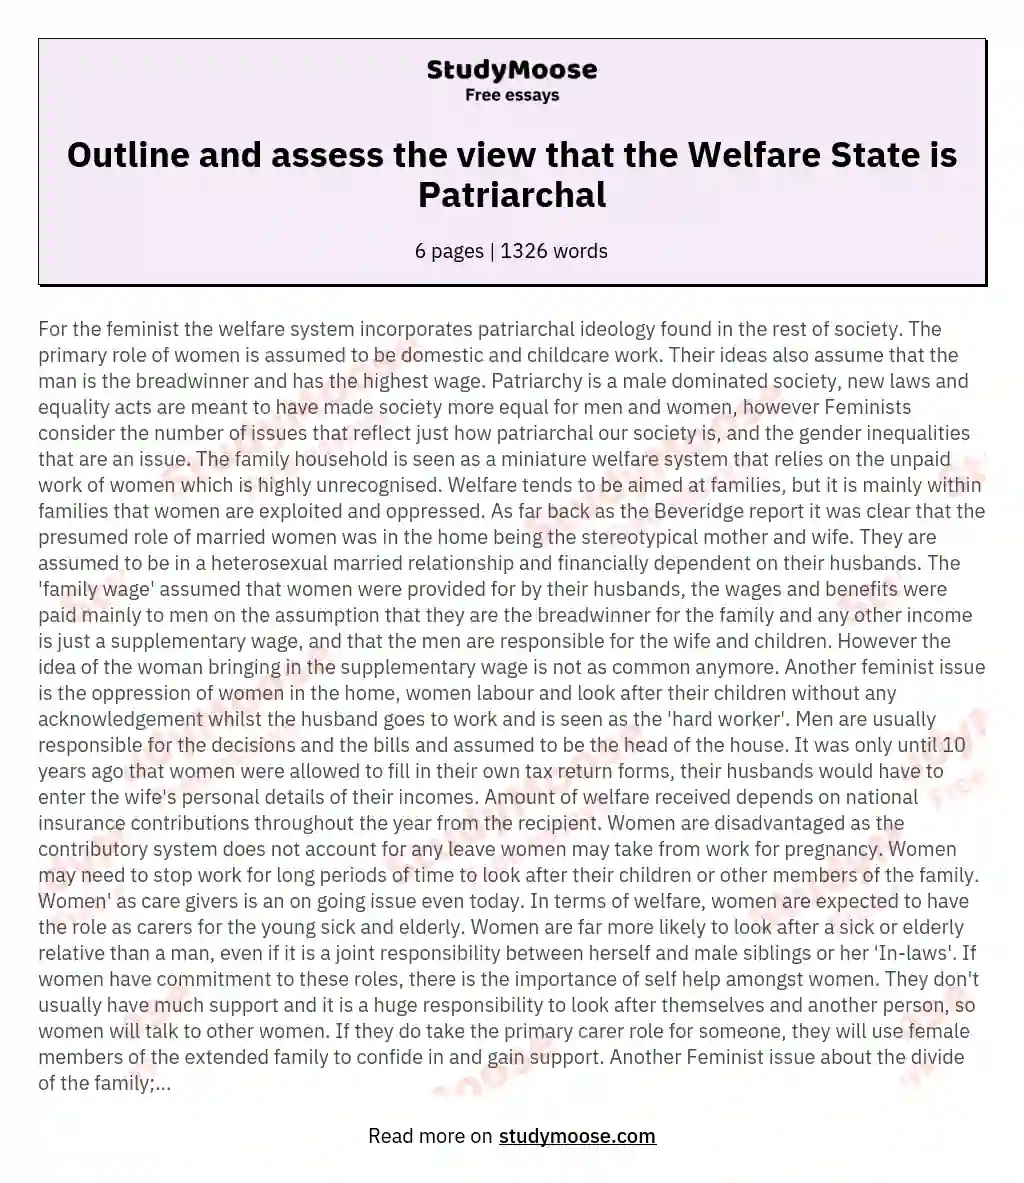 Outline and assess the view that the Welfare State is Patriarchal essay